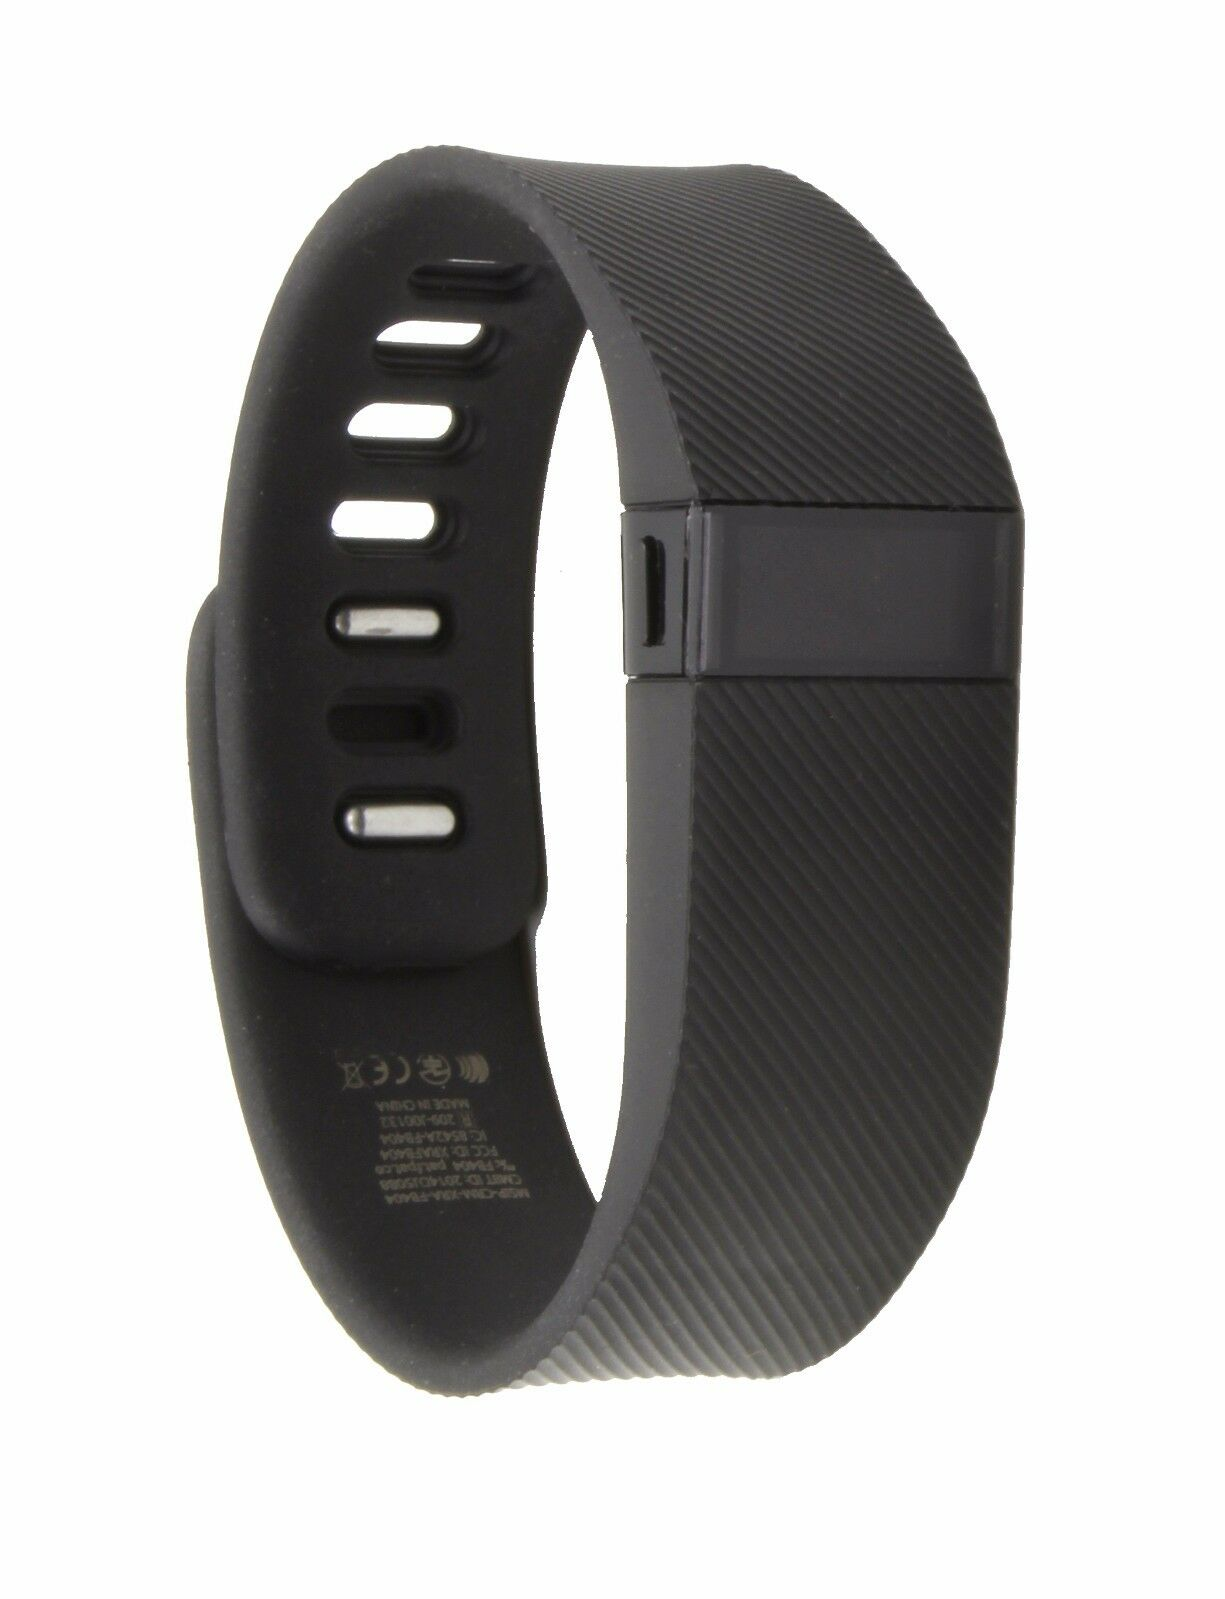 fitbit charge wireless